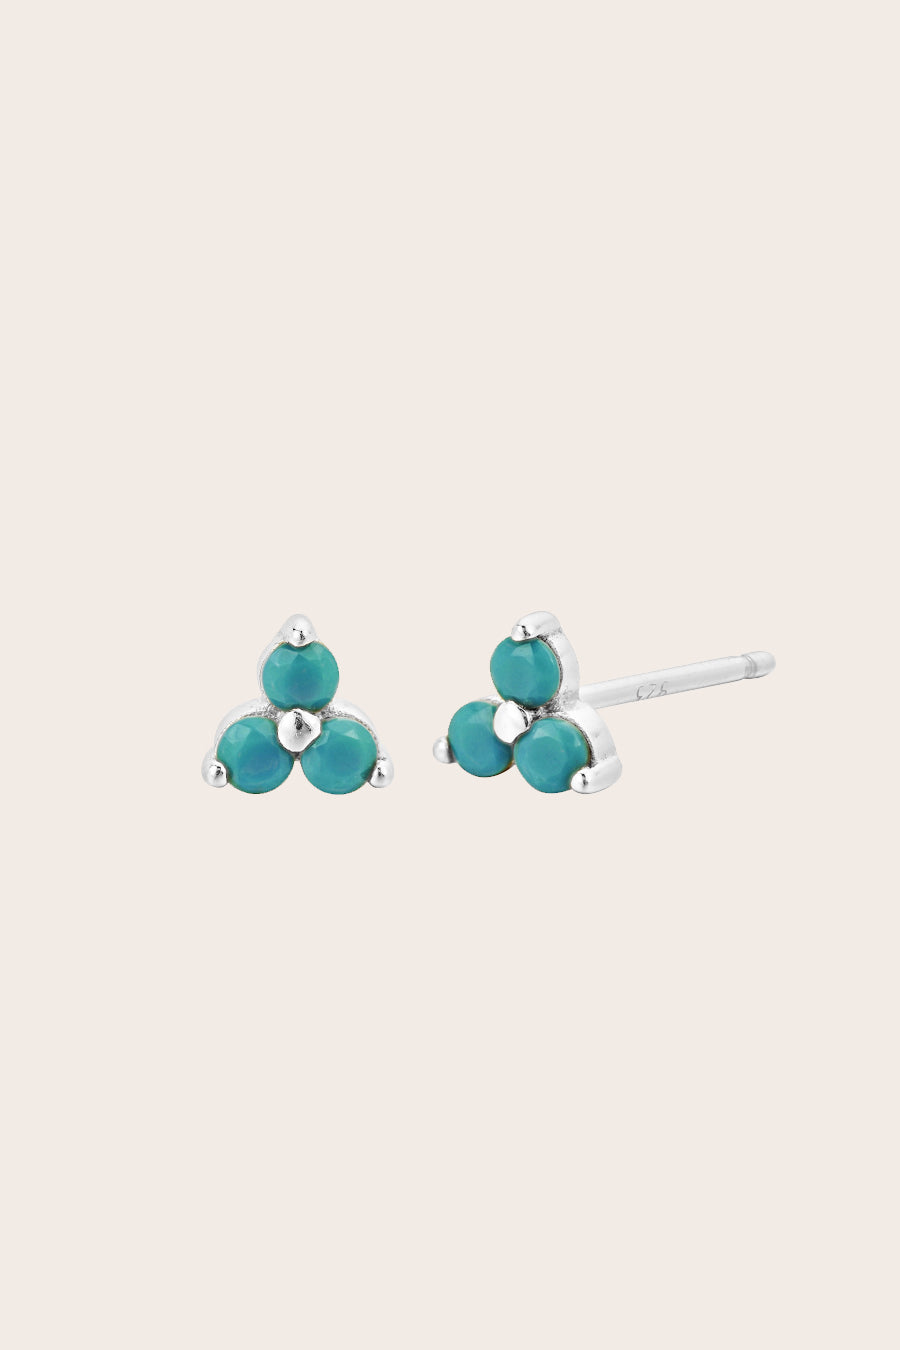 Silver Birthstone Studs - December/Turquoise